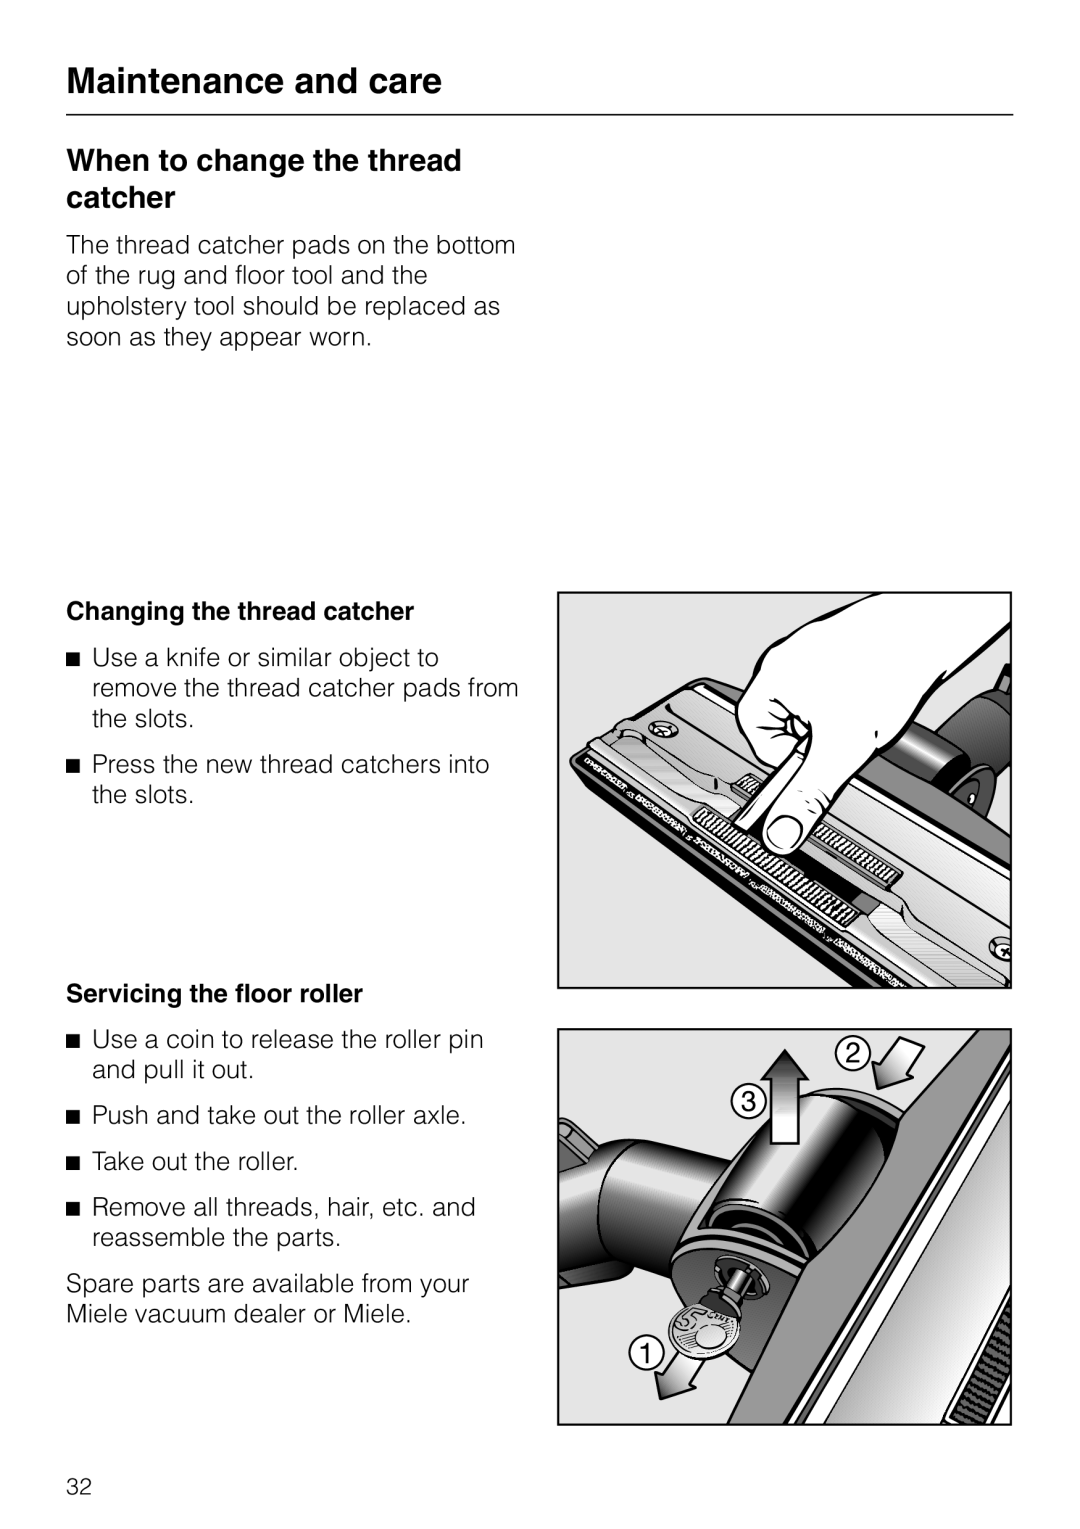 Miele S 5000 operating instructions When to change the thread catcher, Maintenance and care, Changing the thread catcher 